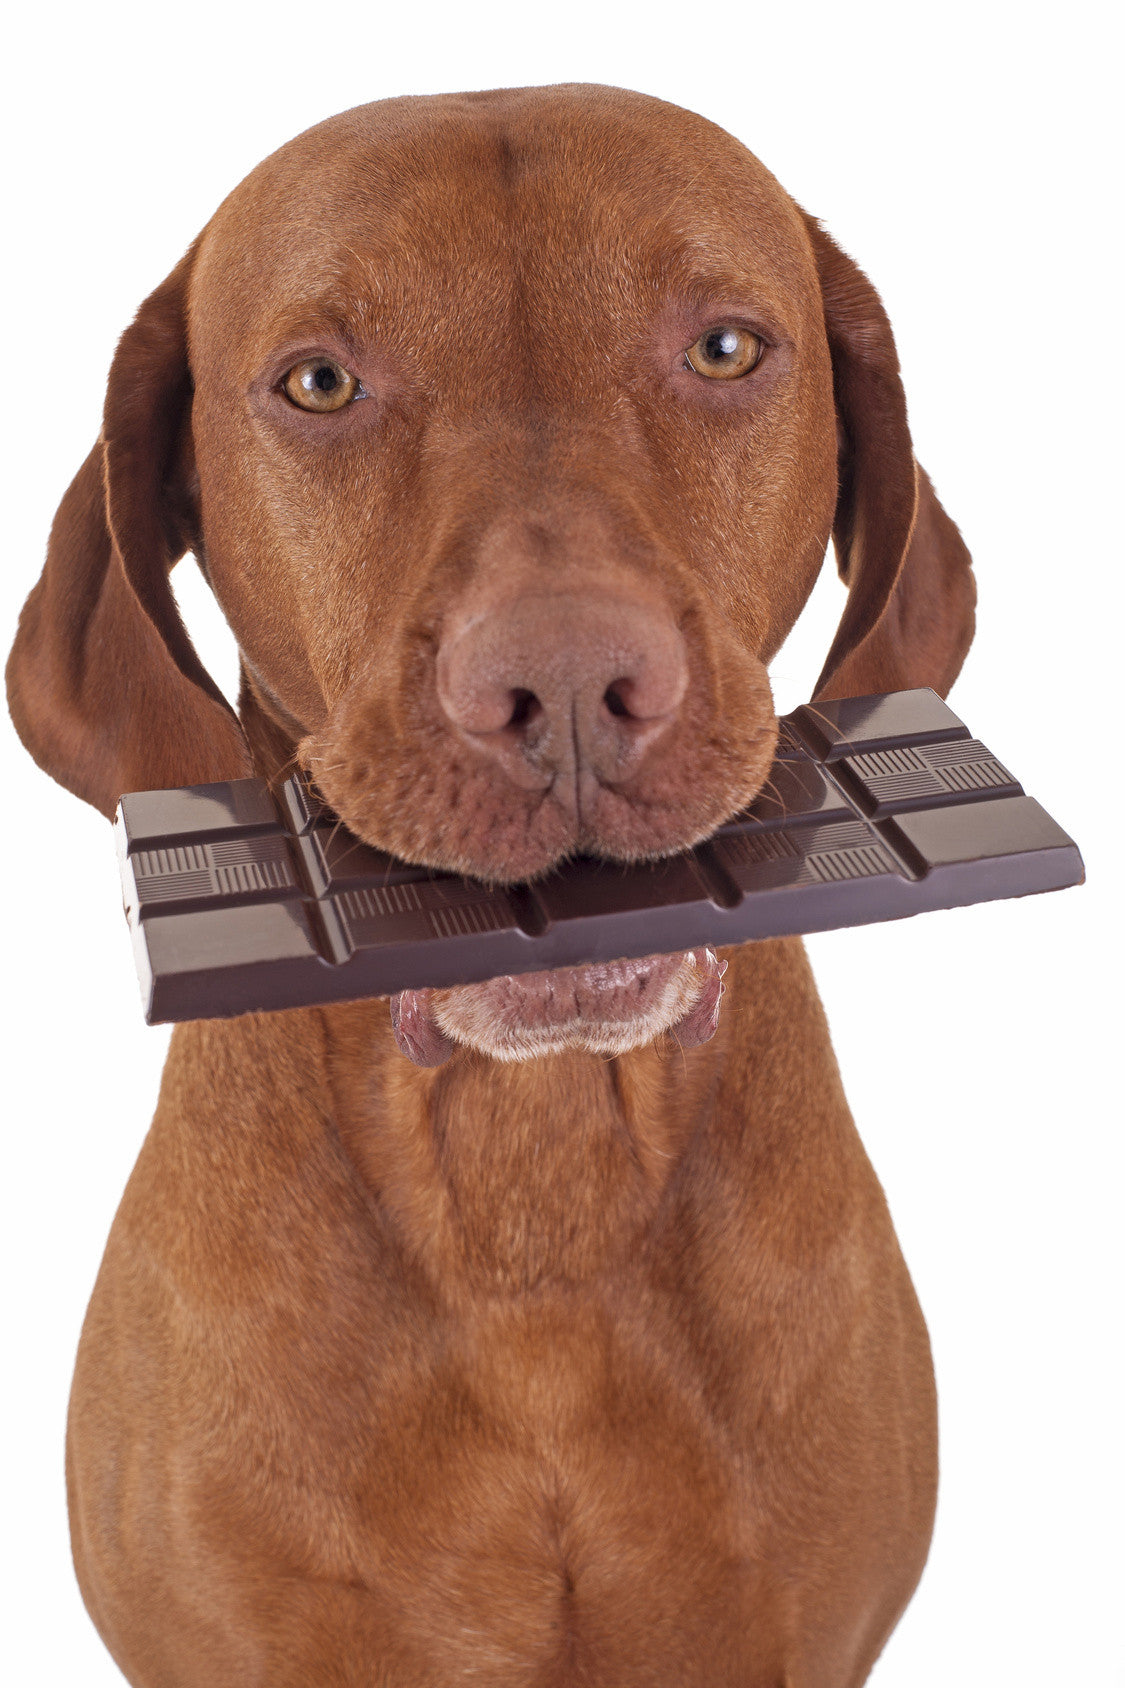 Why you shouldn't feed your dogs chocolate